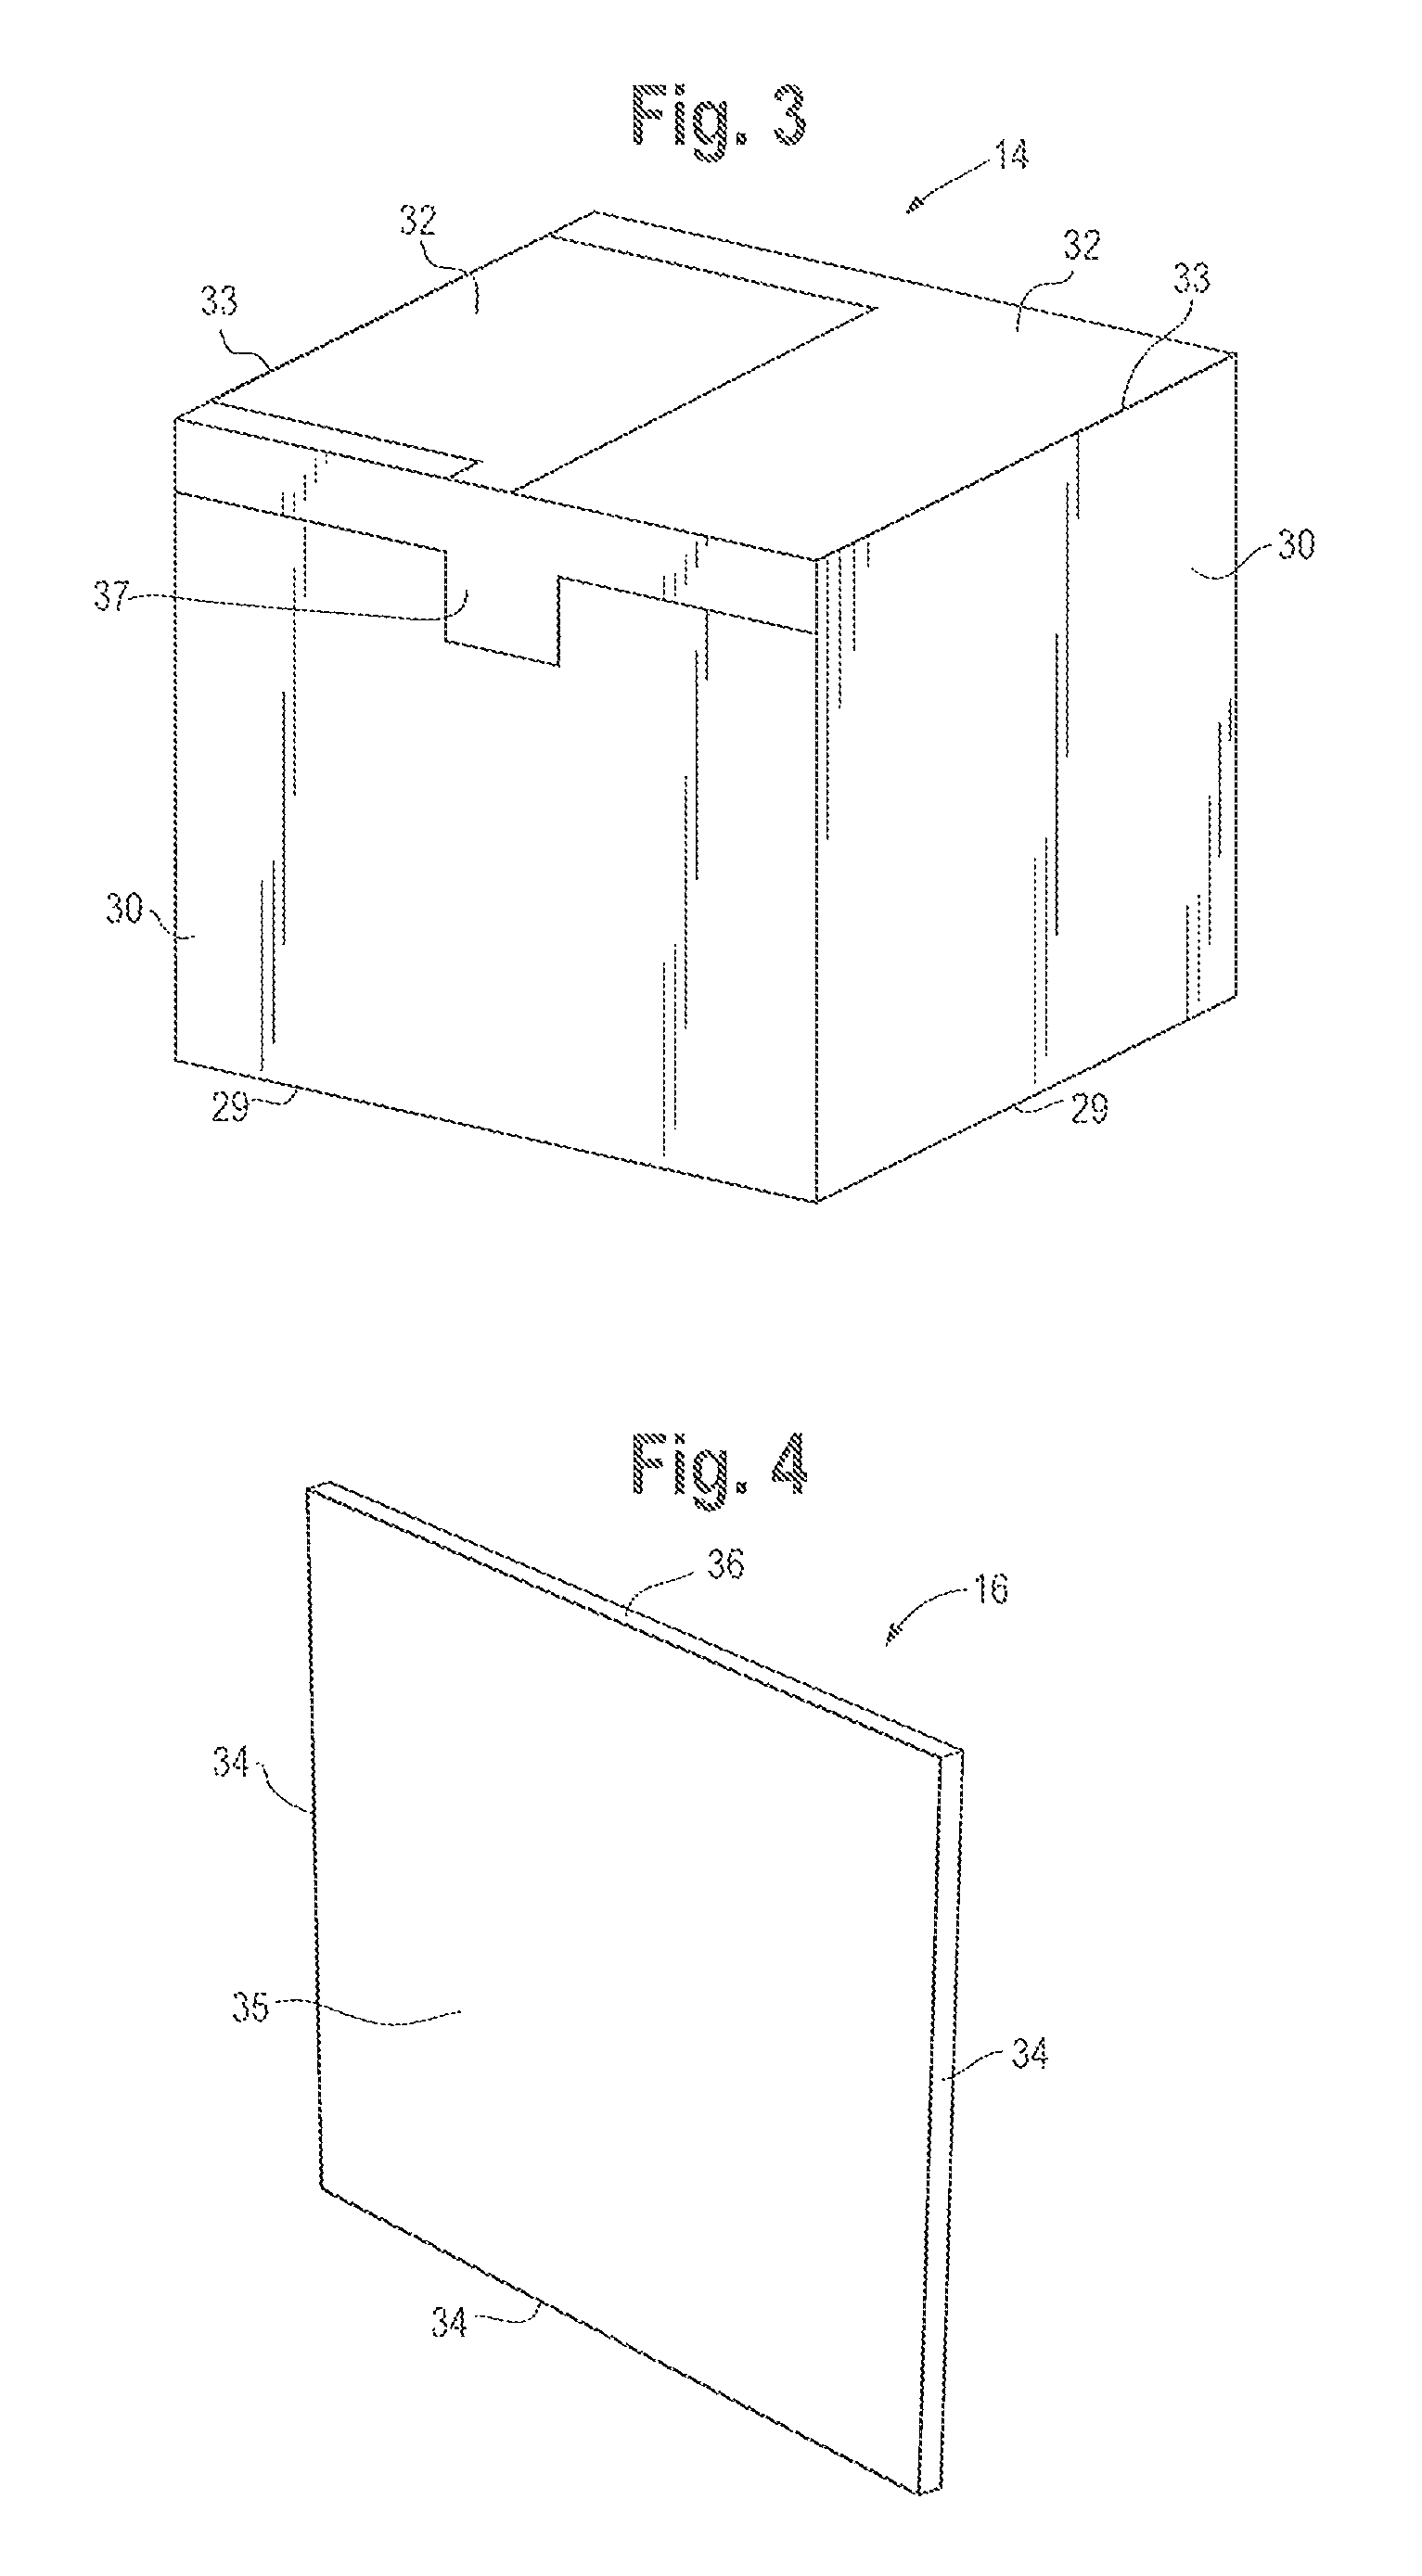 Thermally insulated polyurethane shipper and method of making same